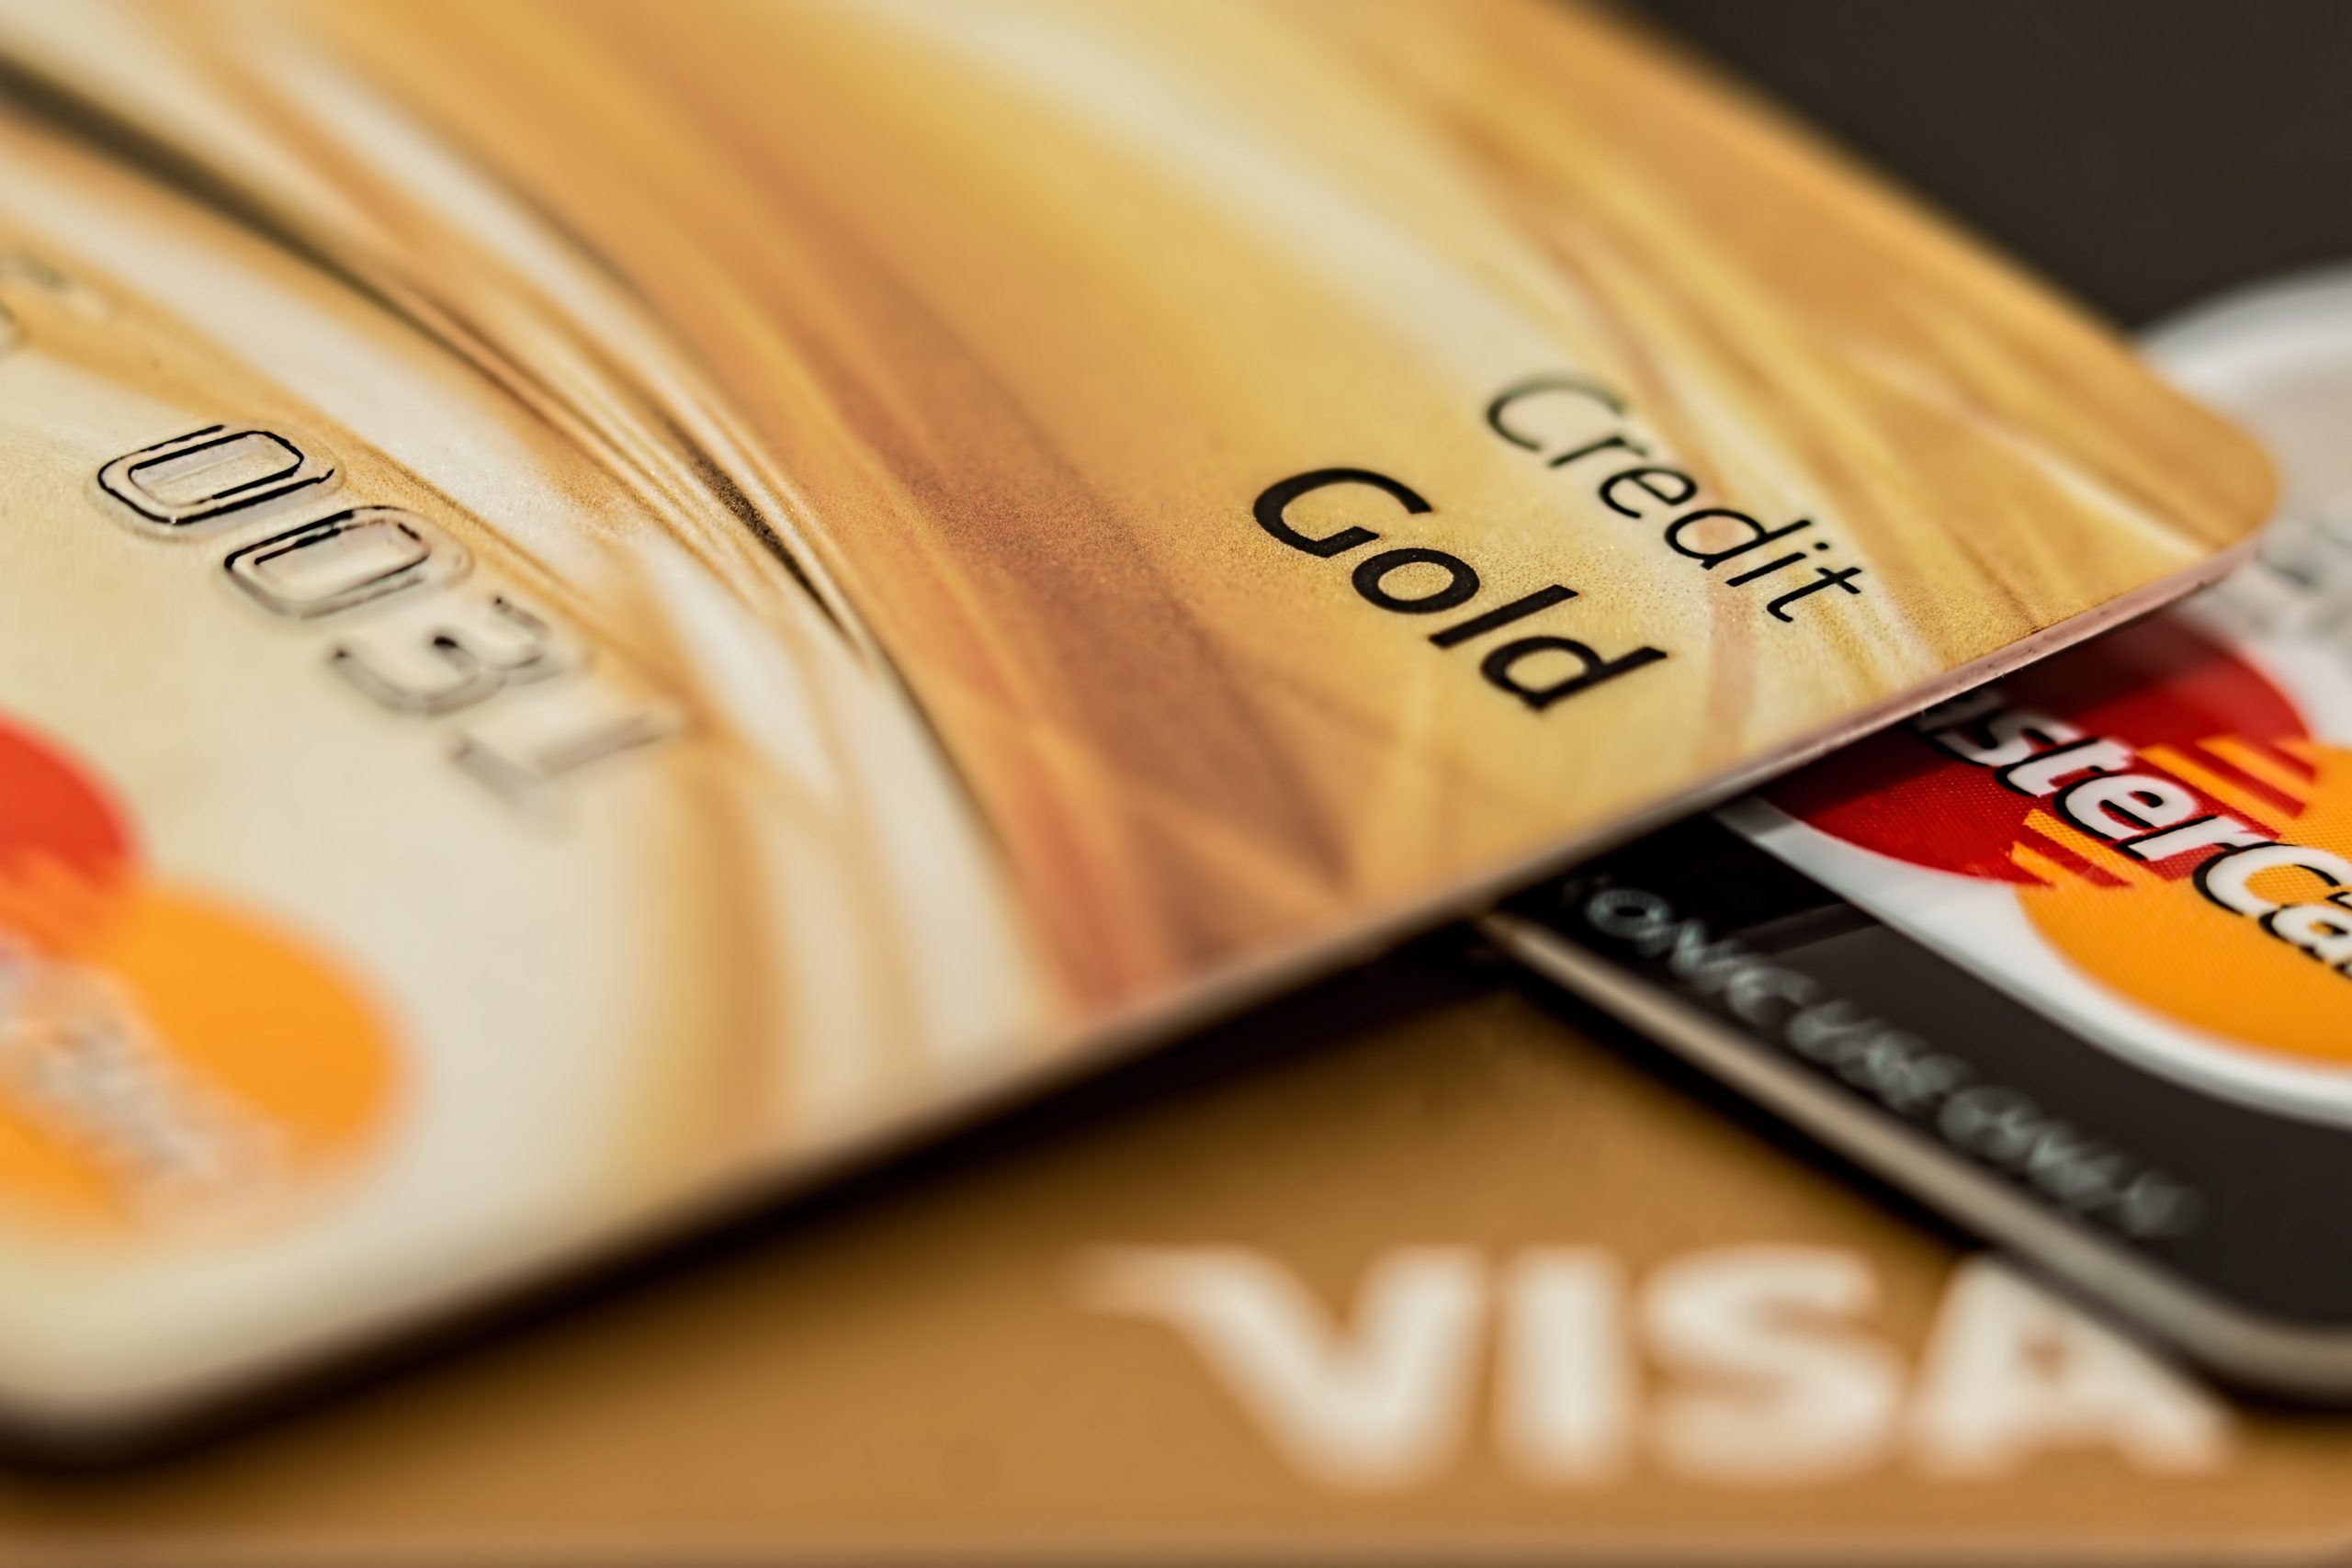 partial image of a credit card